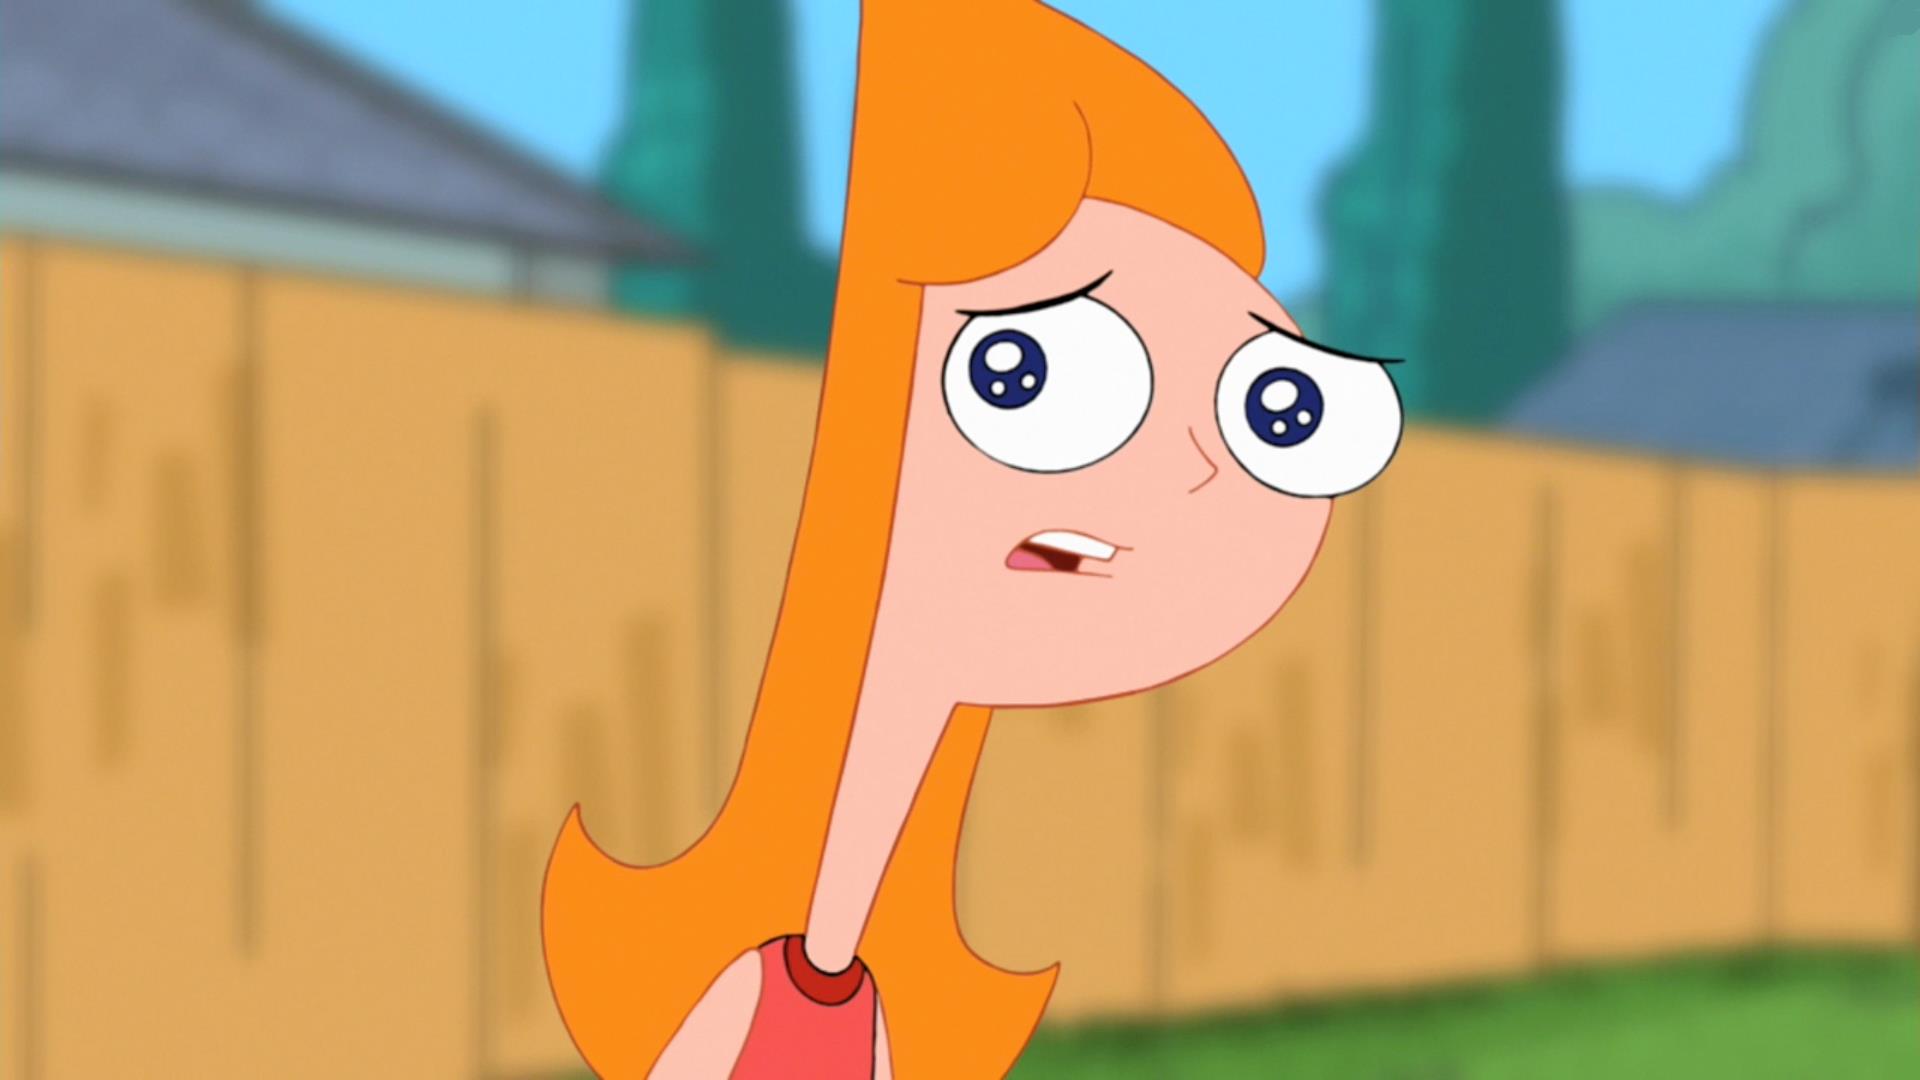 Get awesome Phineas and Ferb HD images in each new Chrome tab! 